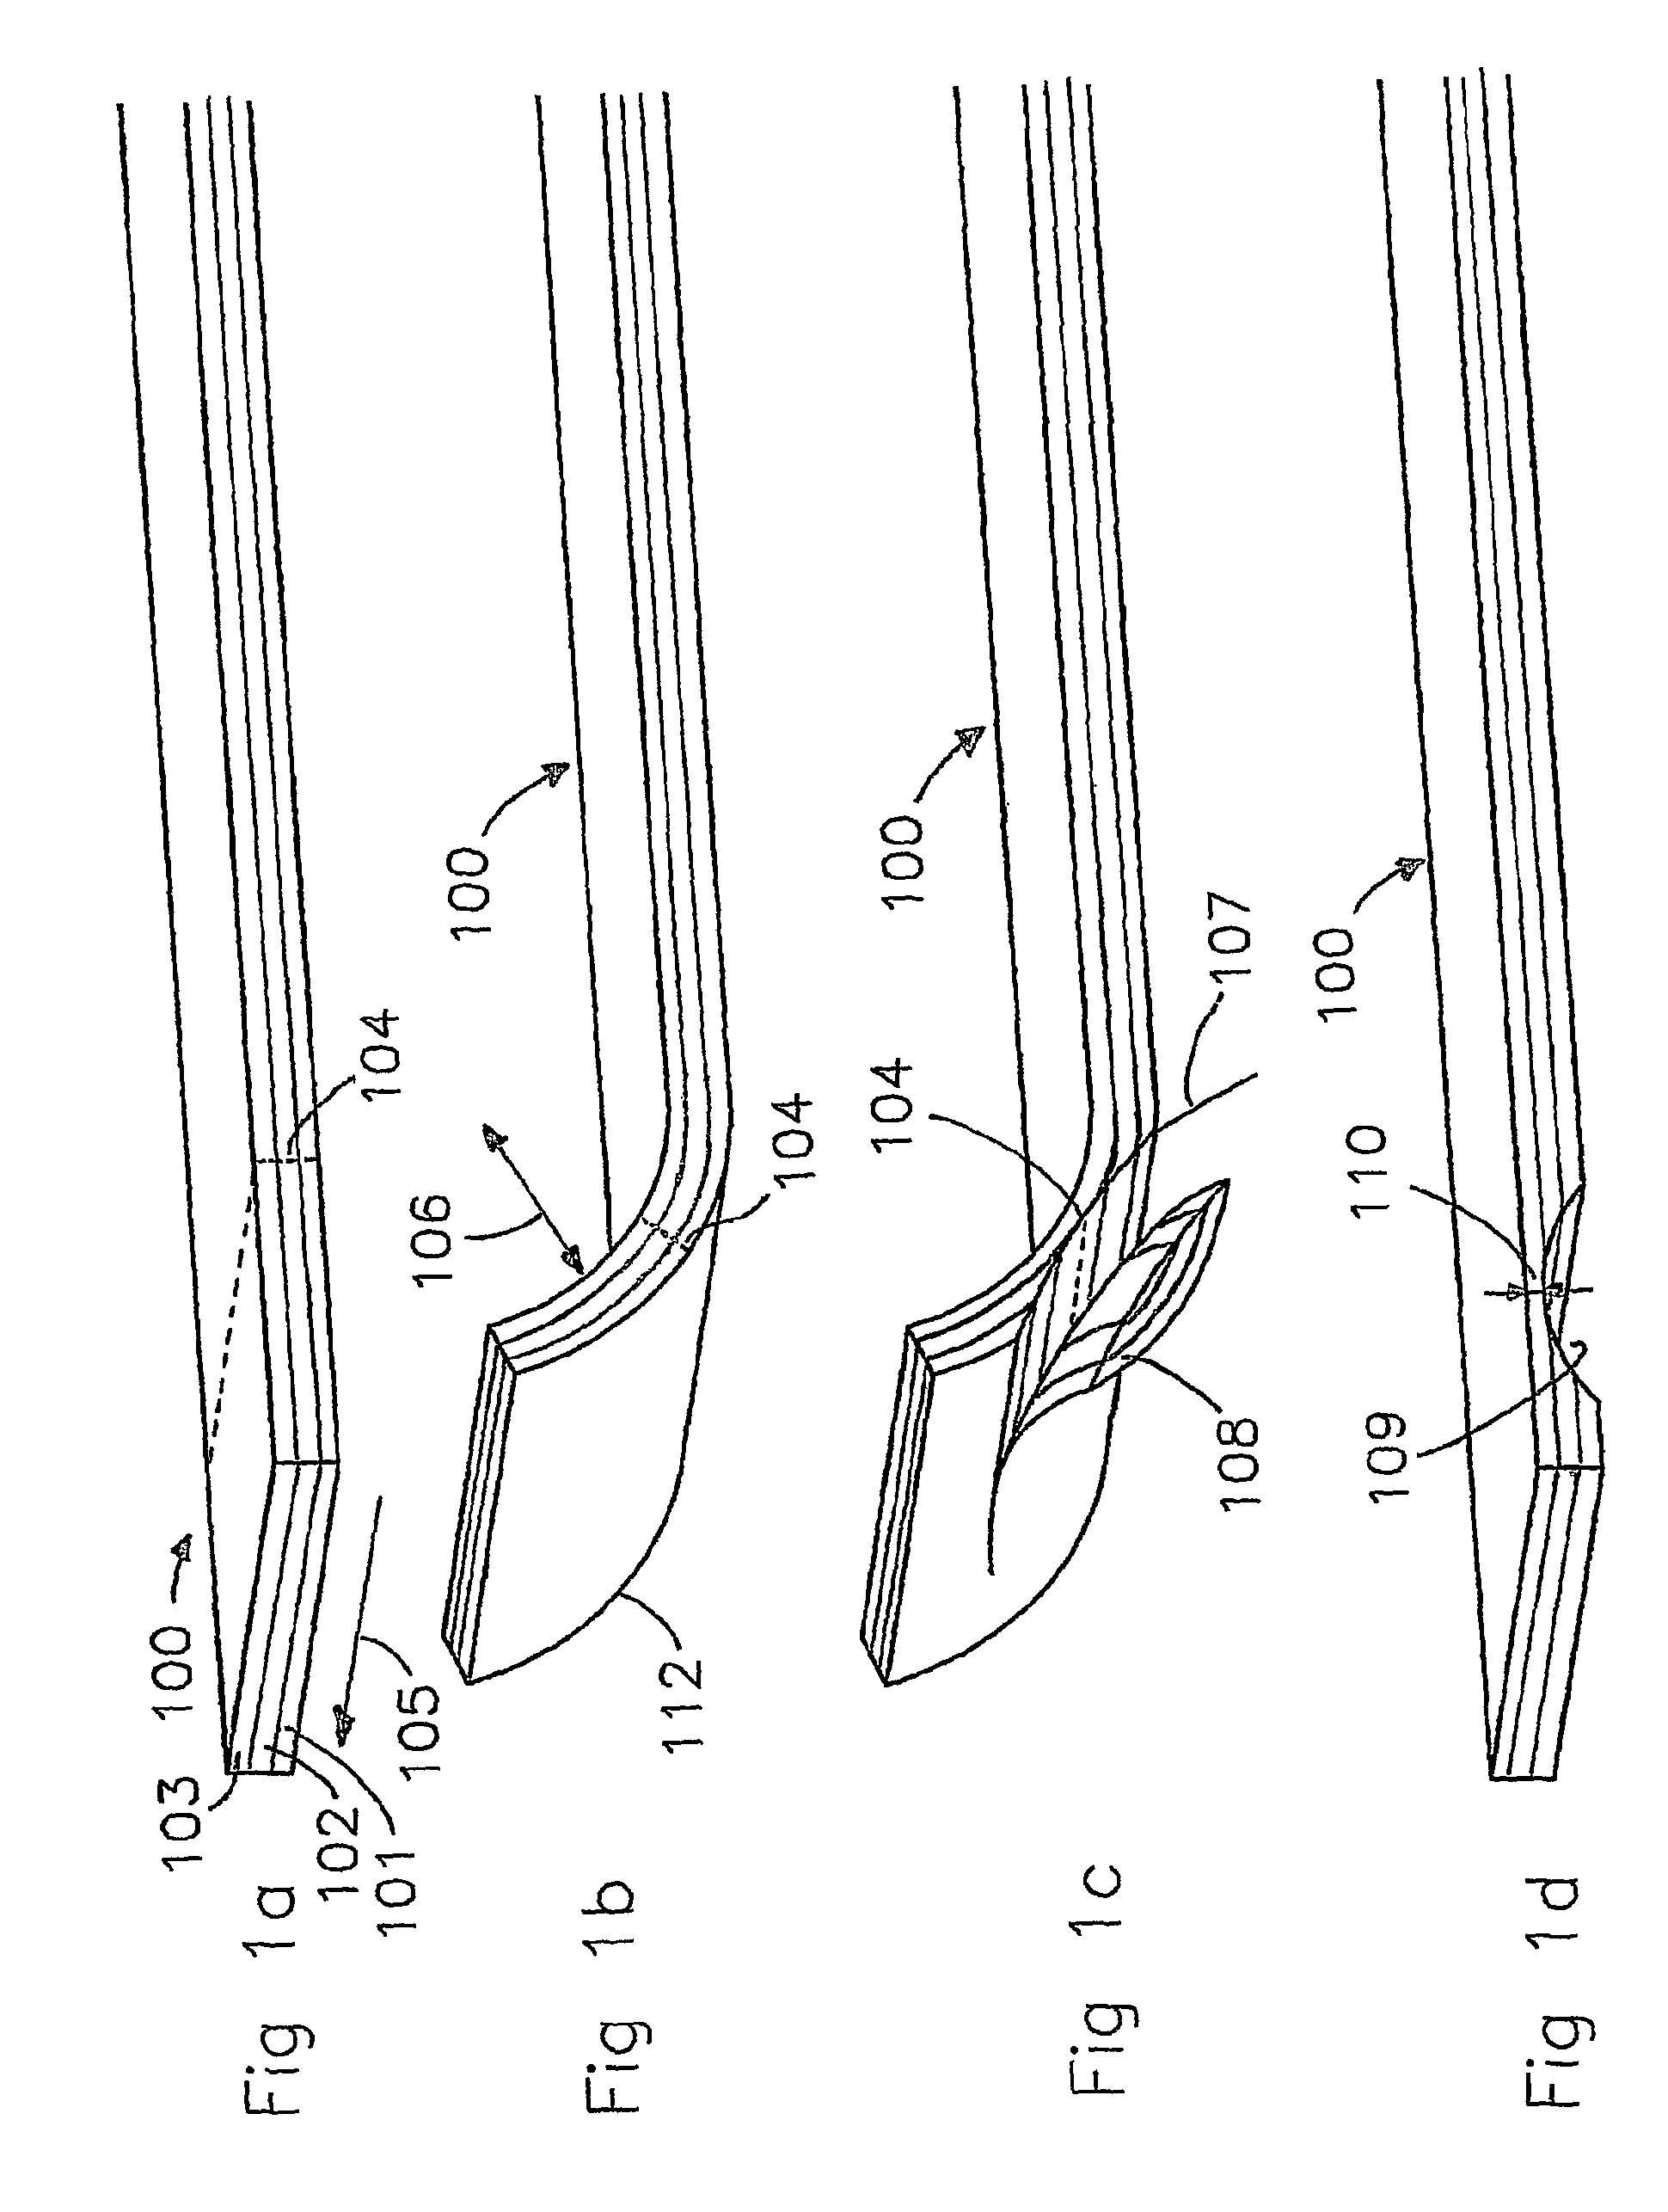 Method and device for producing a groove near an intended edge part of a conveyor belt, which groove is intended to be filled with a filler having sealing properties